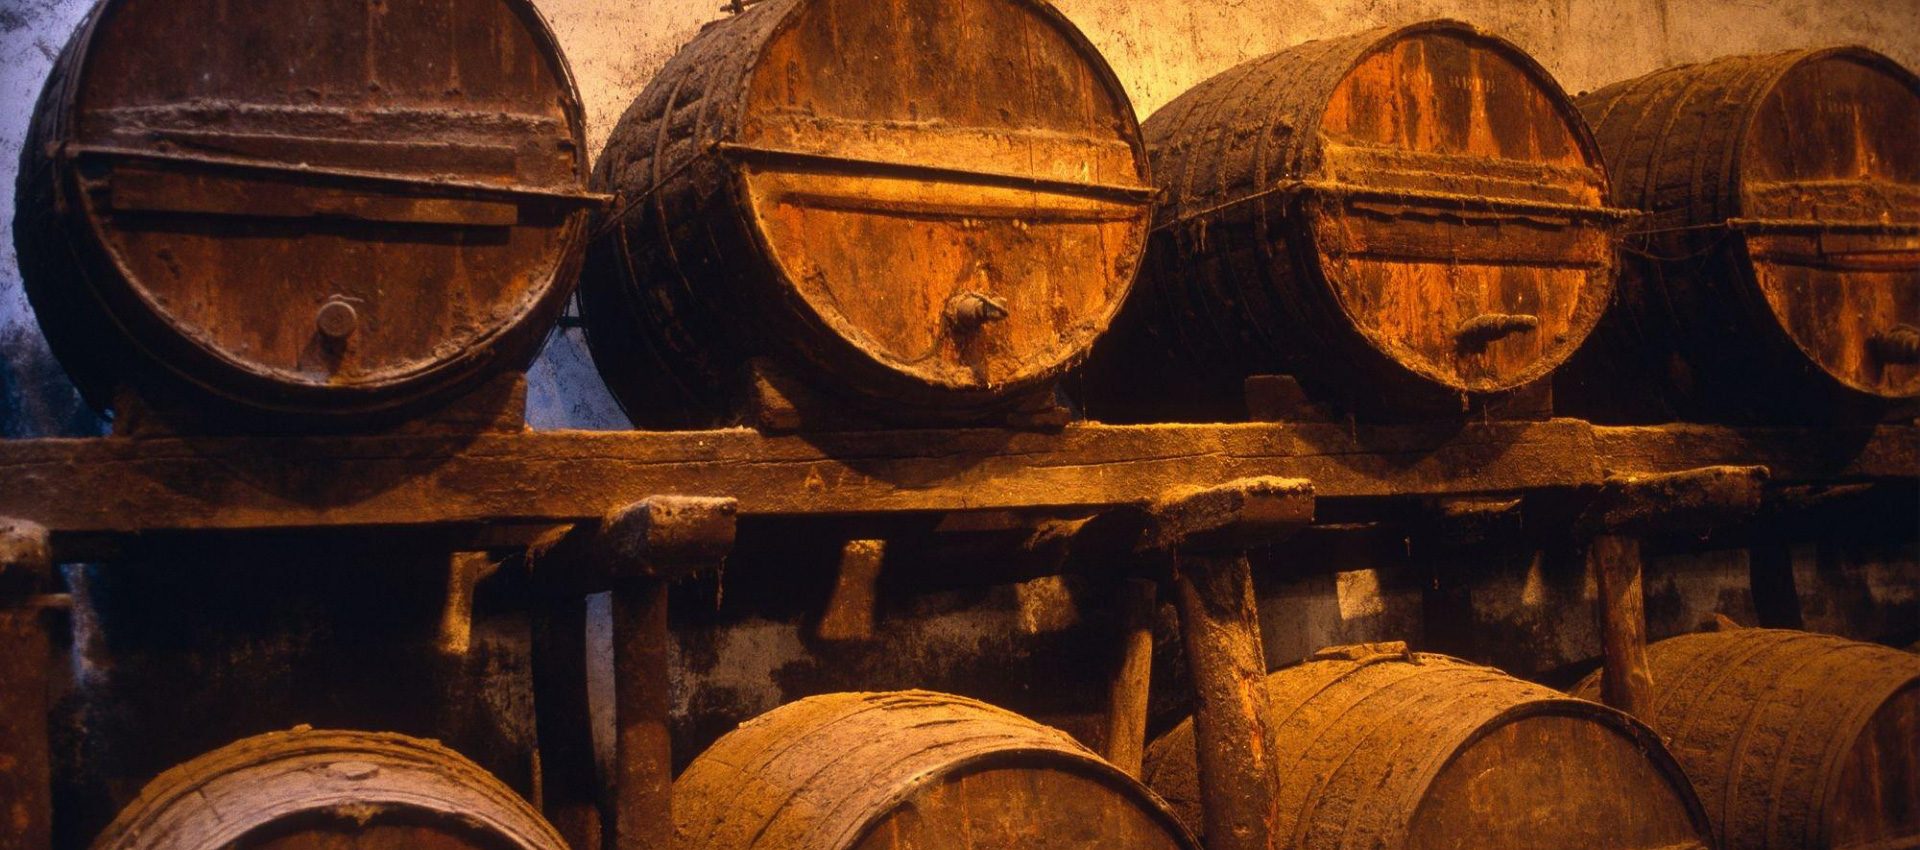 Old oak barrels from one of the traditional wine cellar we visit in the villages of Cadiz.